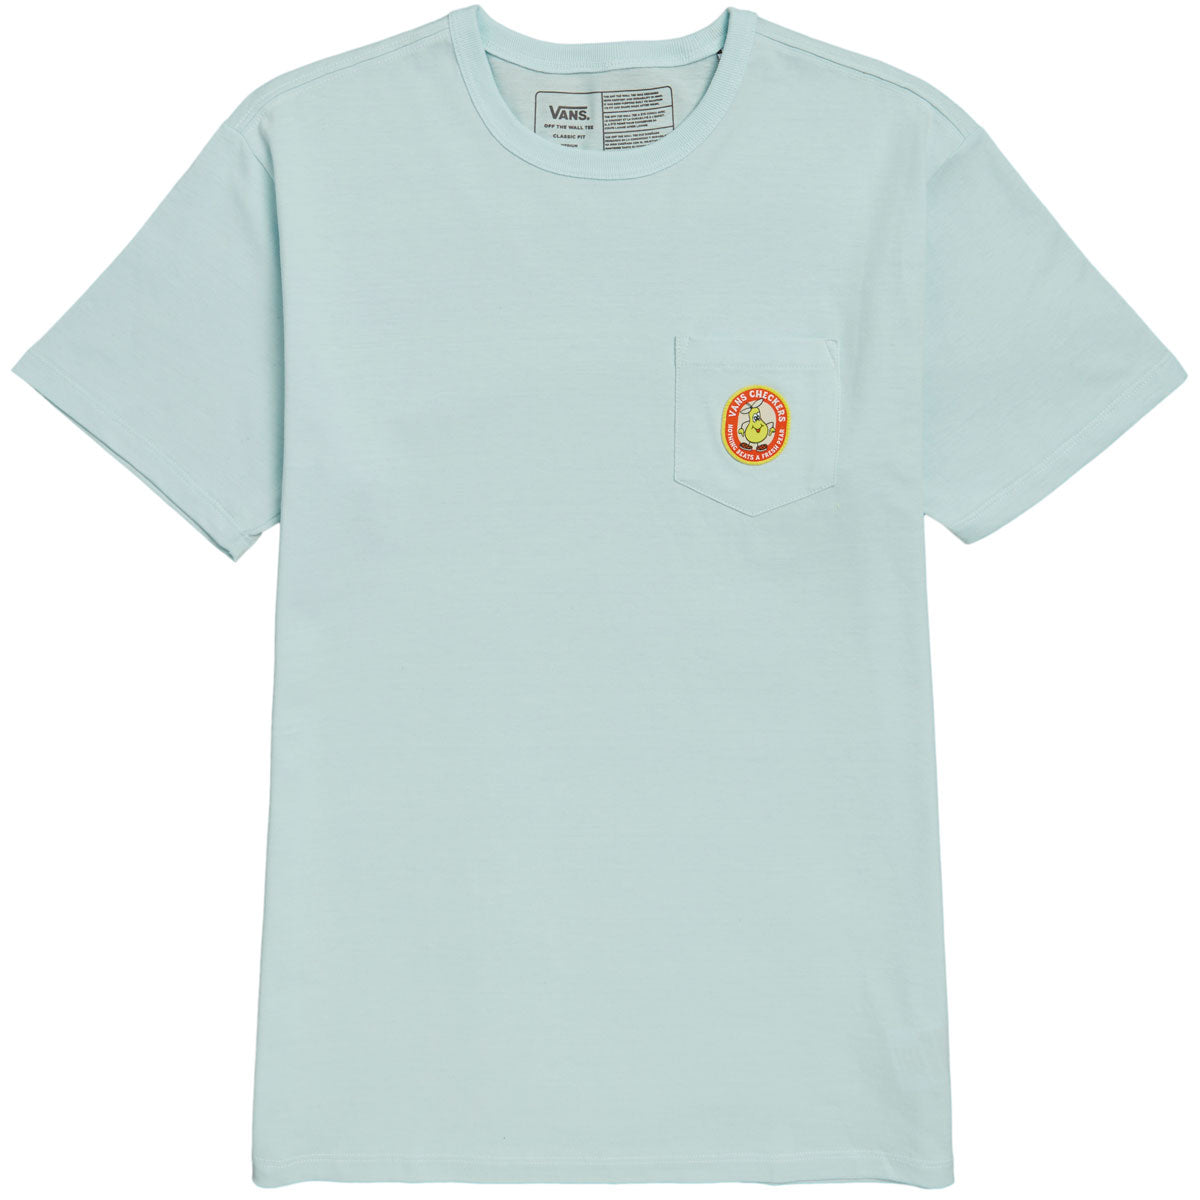 Vans Off The Wall Graphic Pocket T-Shirt - Blue Glow image 1